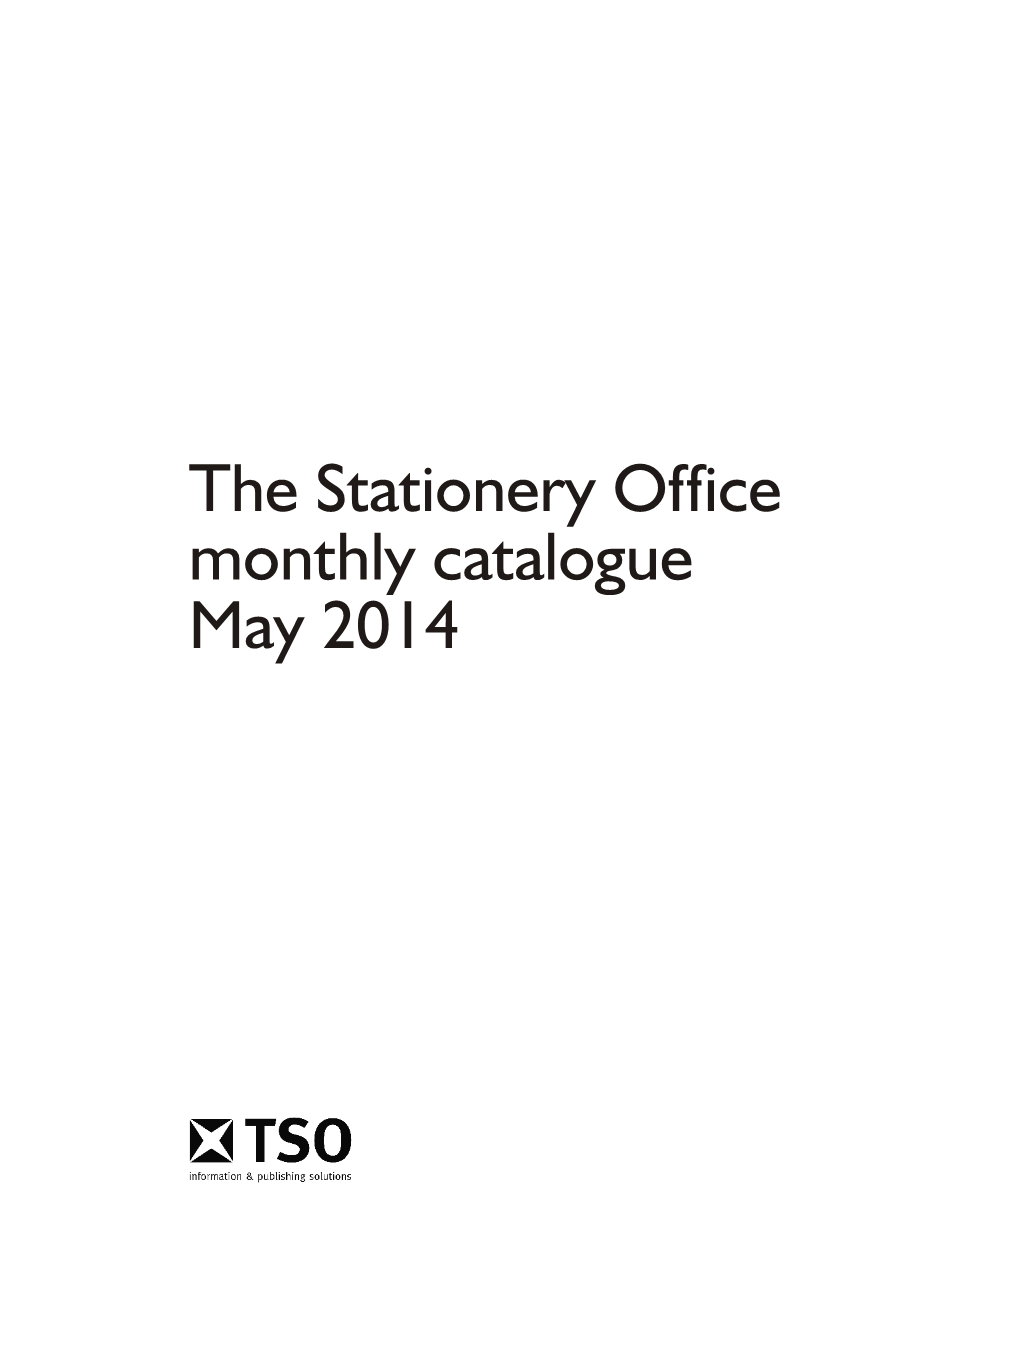 The Stationery Office Monthly Catalogue May 2014 Ii